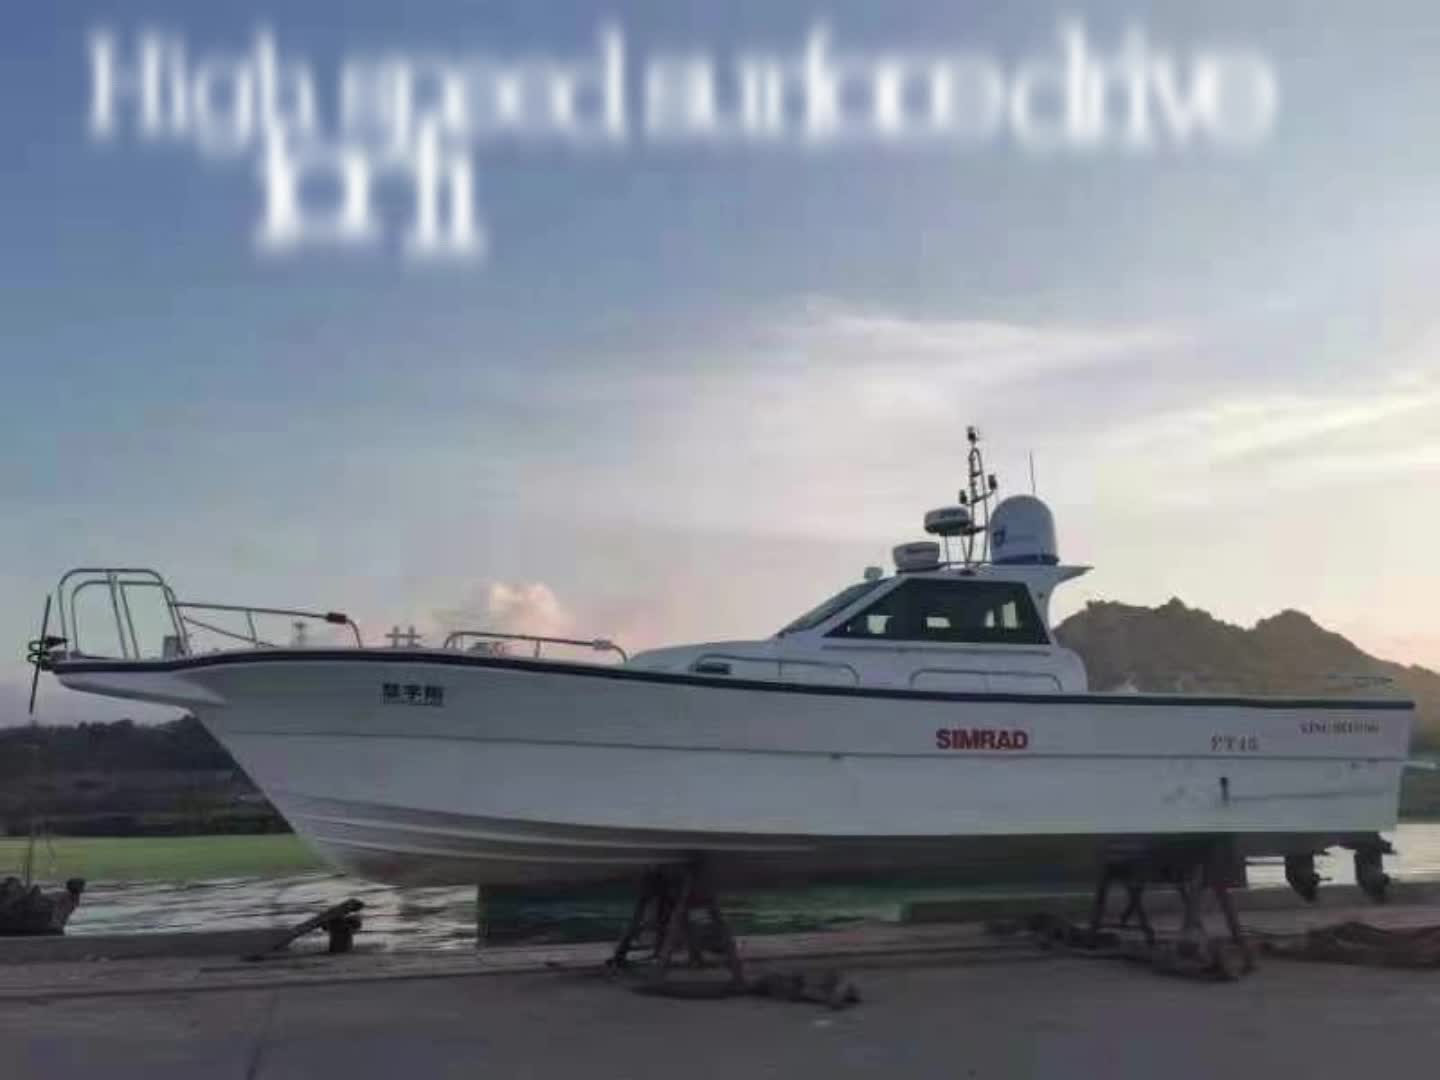 On a clear day, feel the sun and waves at a speed of 35 knots in a fiberglass boat with a 200 hp engine and a mobile BH550 surface drive system..mp4